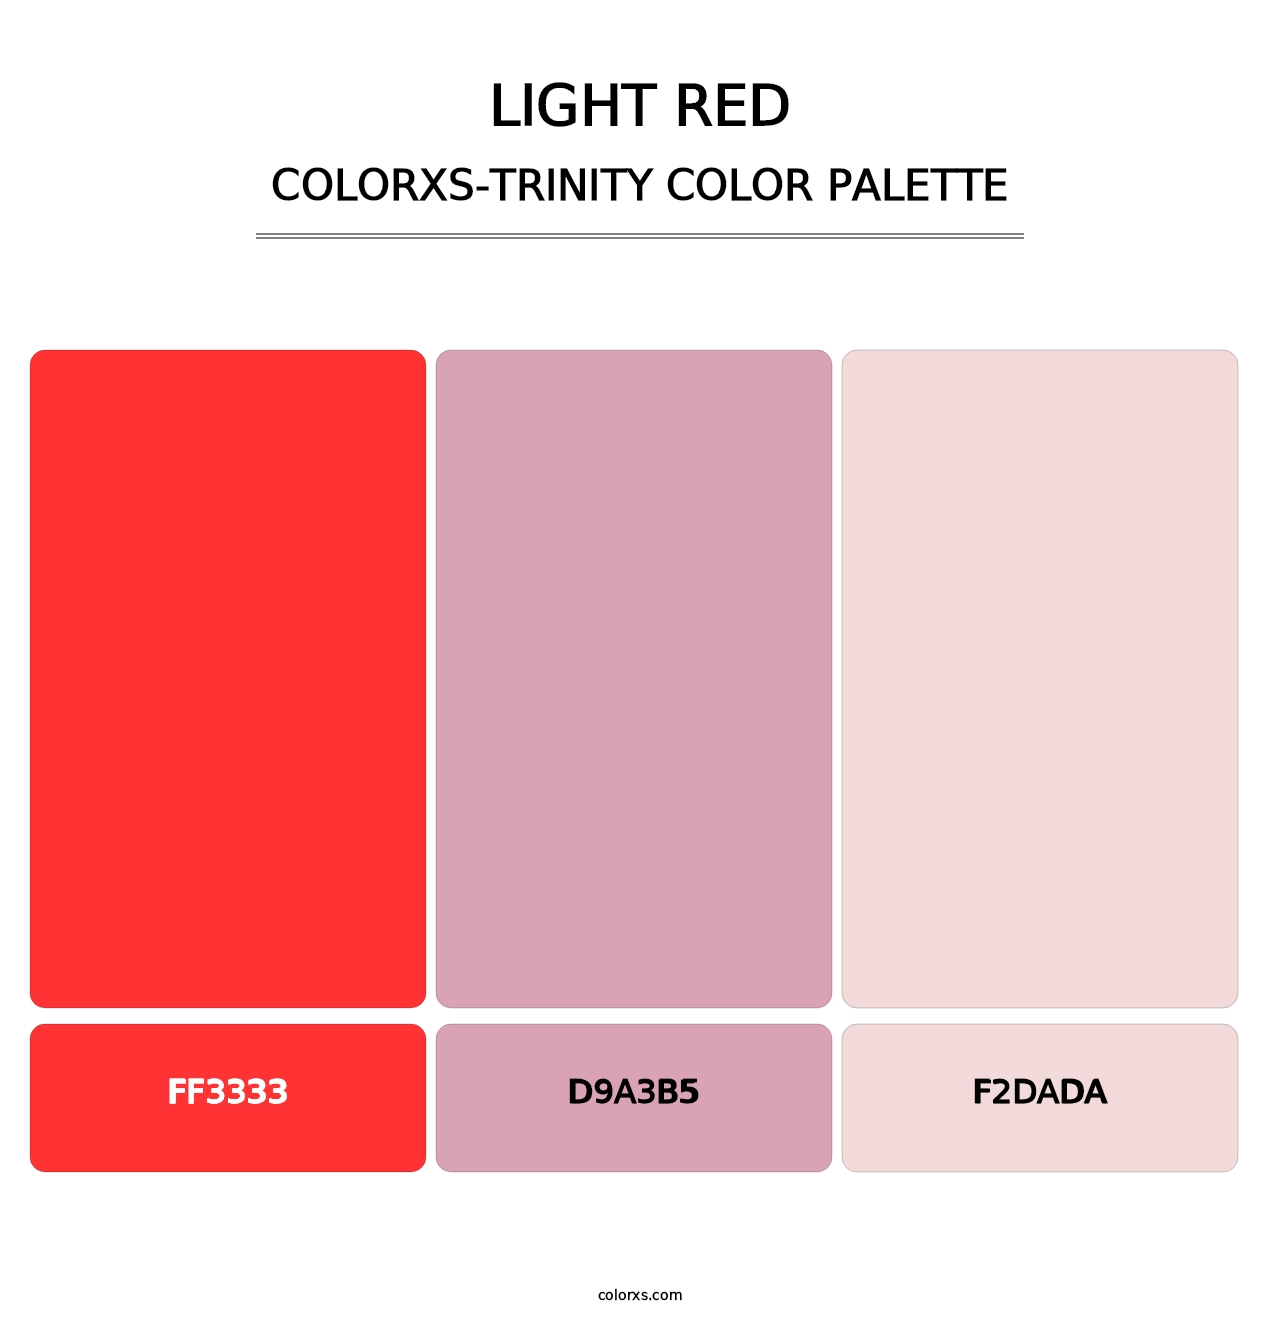 Light Red - Colorxs Trinity Palette